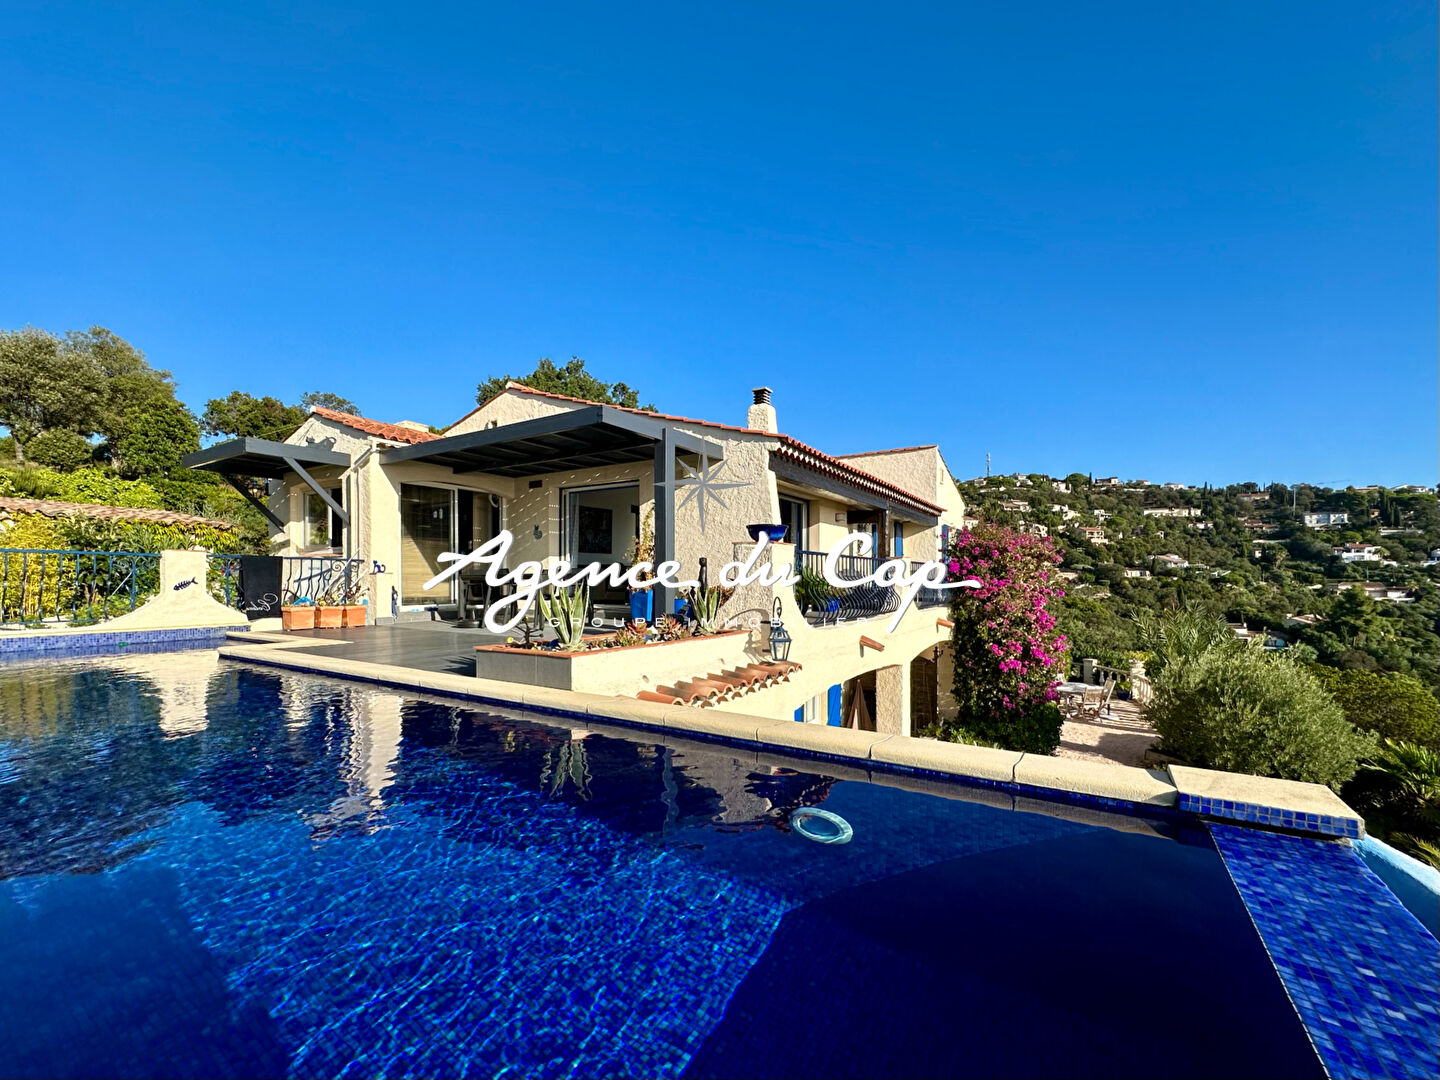 173sqm 5-ROOM VILLA INCLUDING 4 BEDROOMS, WITH POOL AND GARAGE, SEA VIEW IN AUX ISSAMBRES